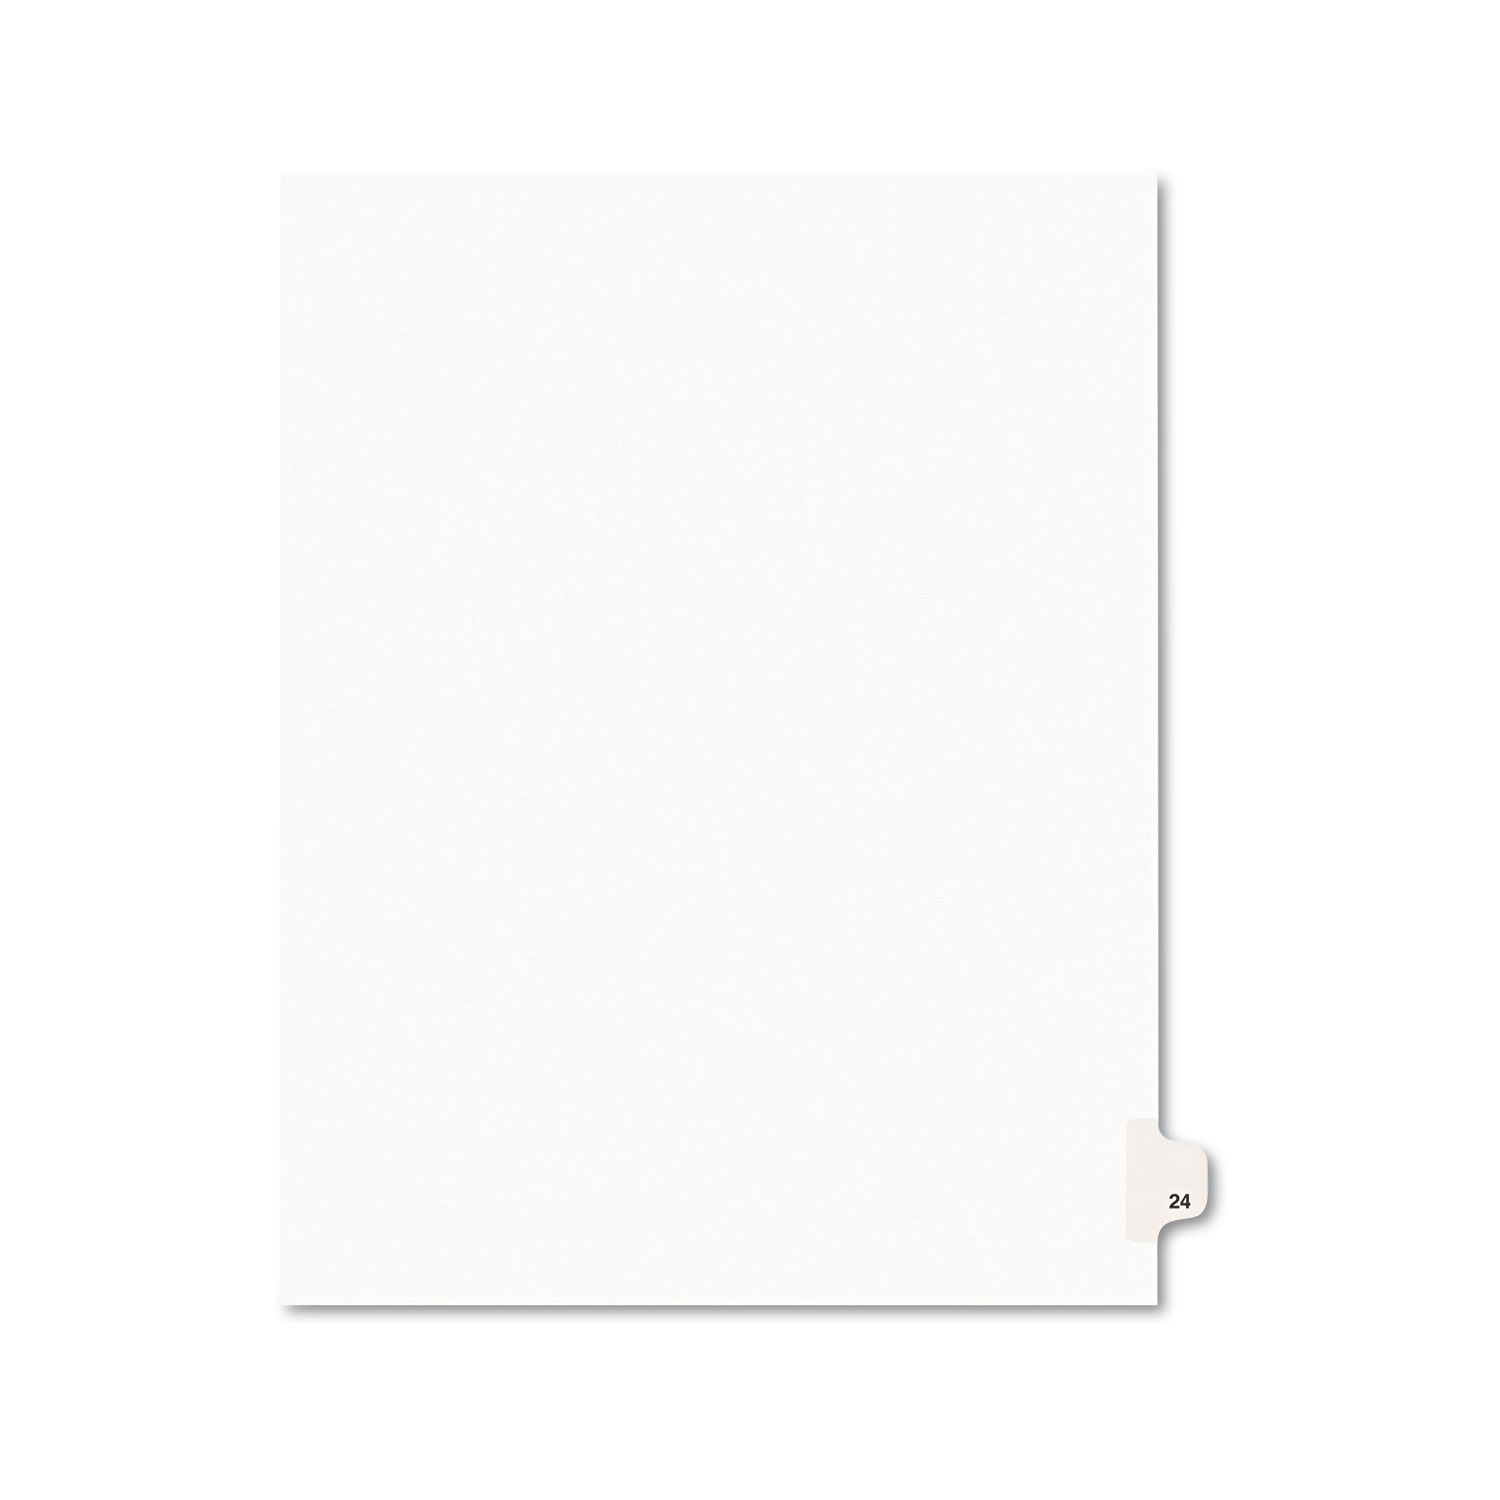  Avery 01024 Preprinted Legal Exhibit Side Tab Index Dividers, Avery Style, 10-Tab, 24, 11 x 8.5, White, 25/Pack (AVE01024) 